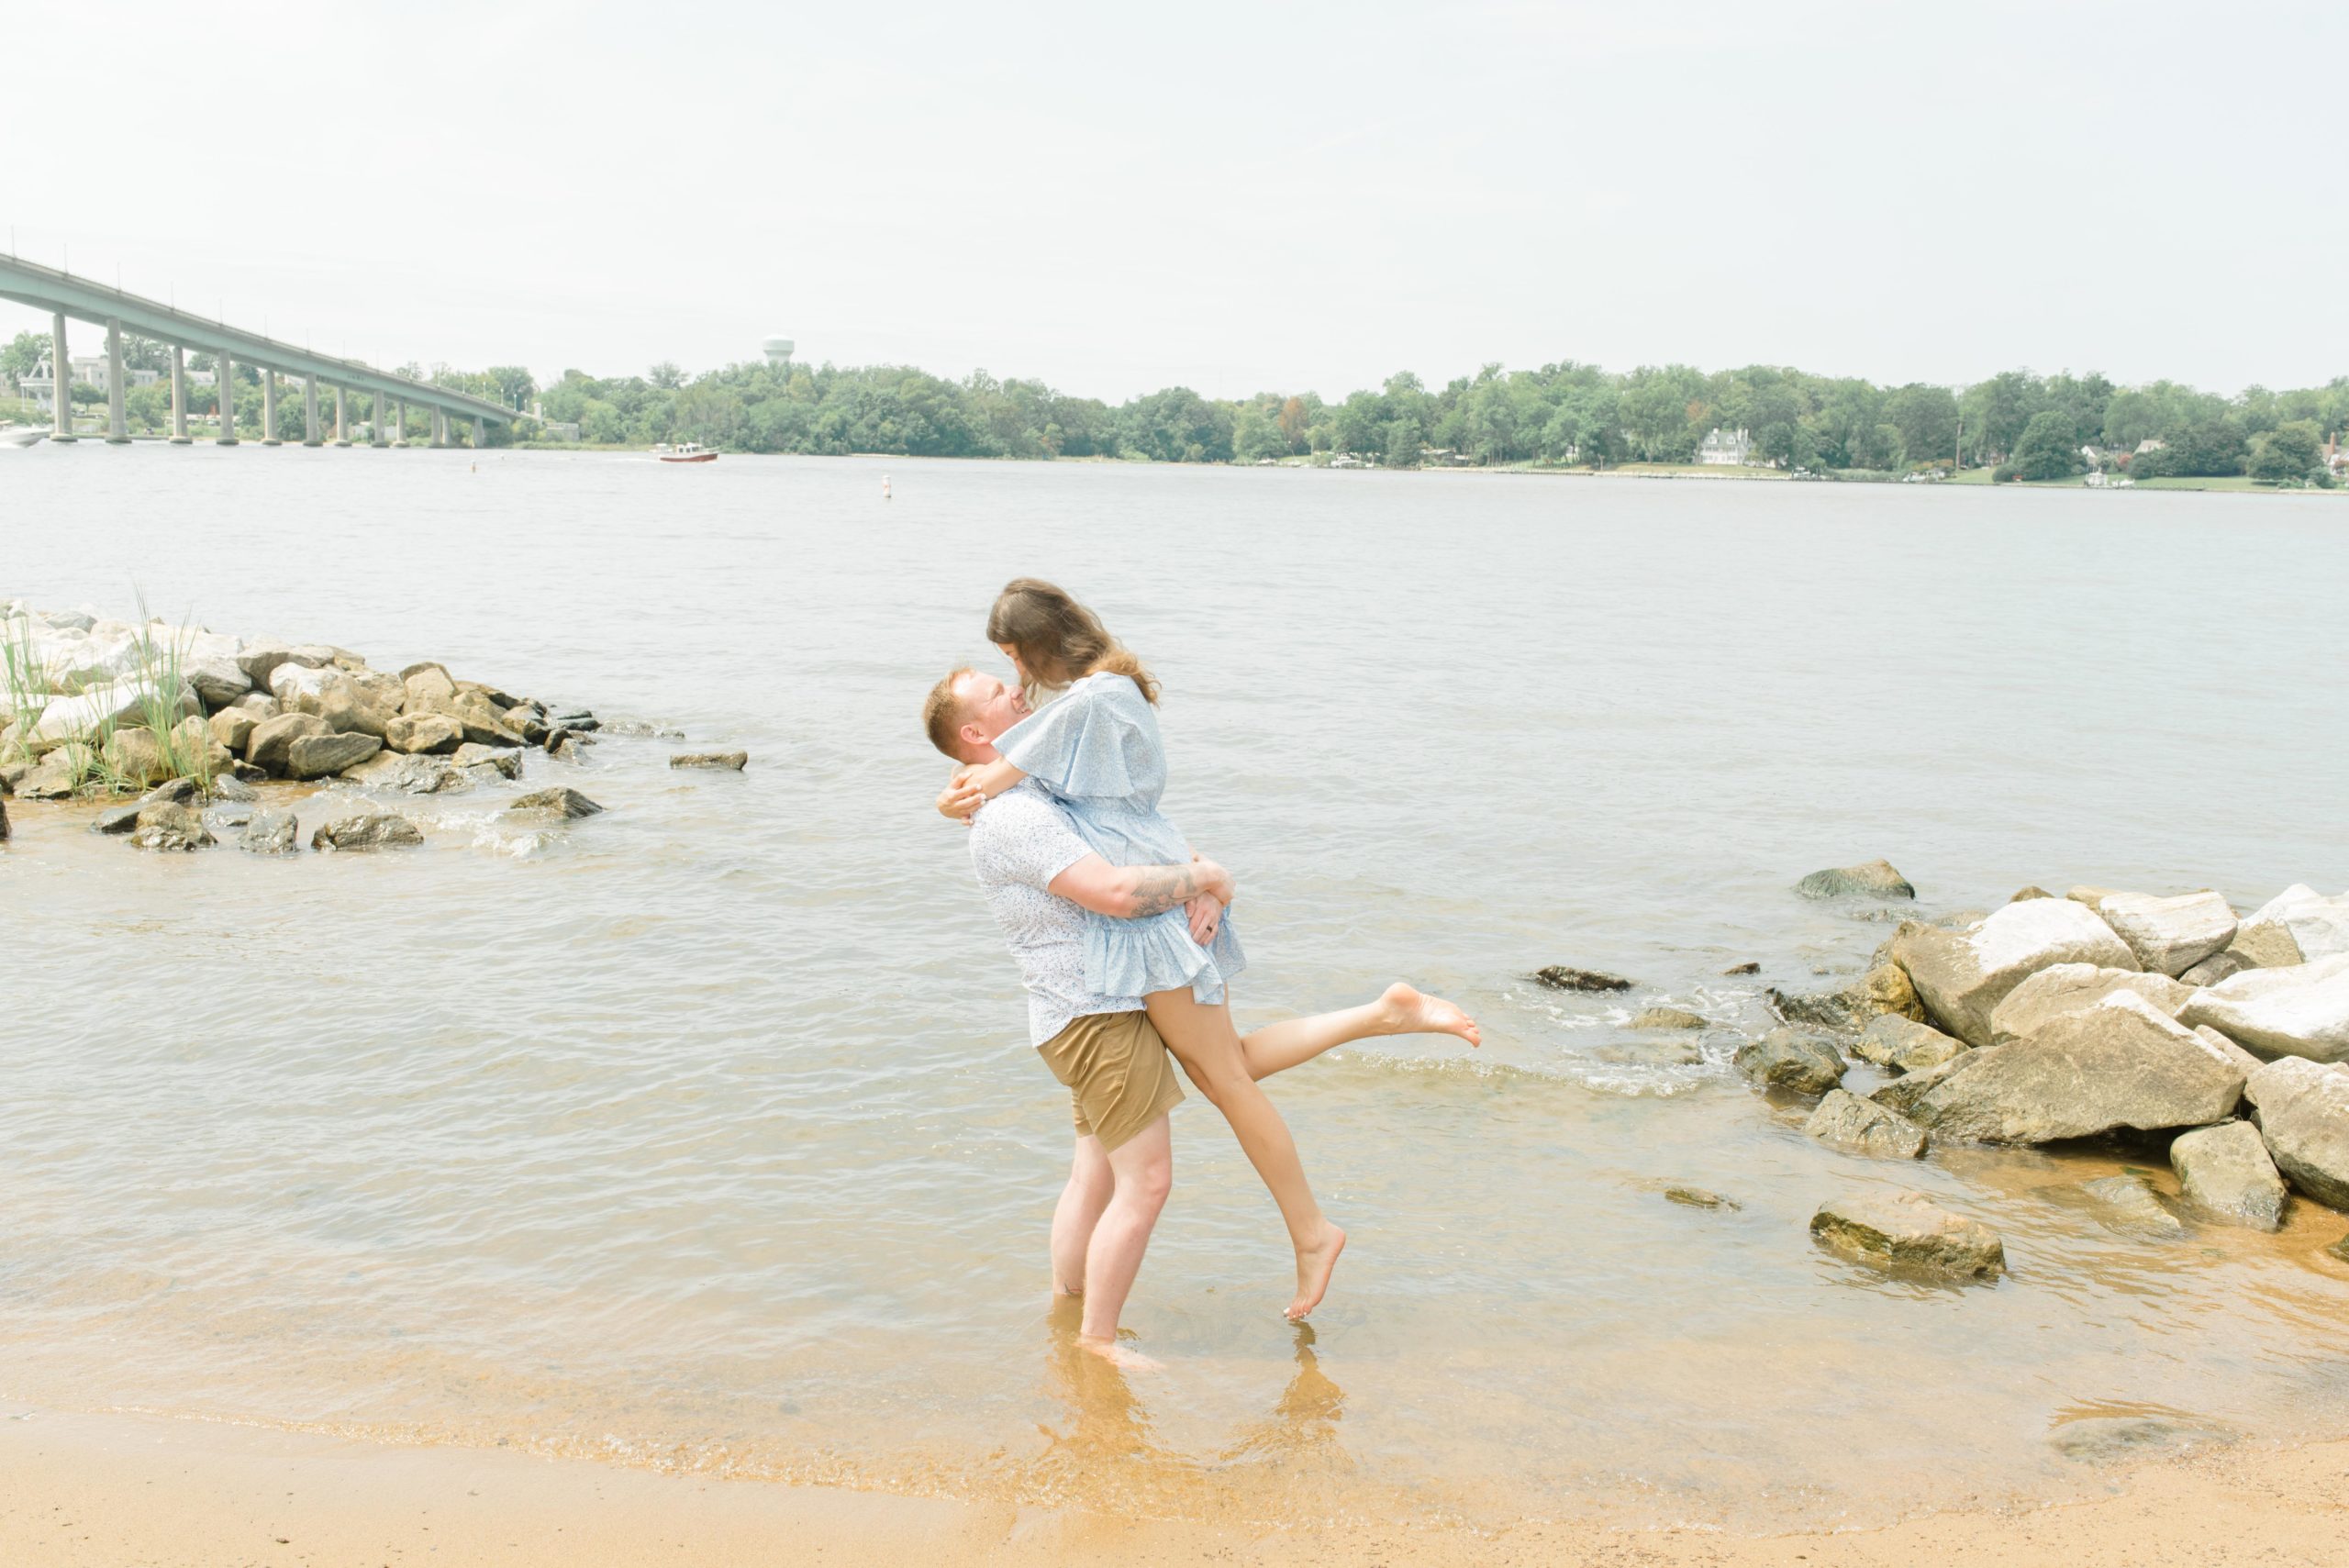 Engagement photos in the water.